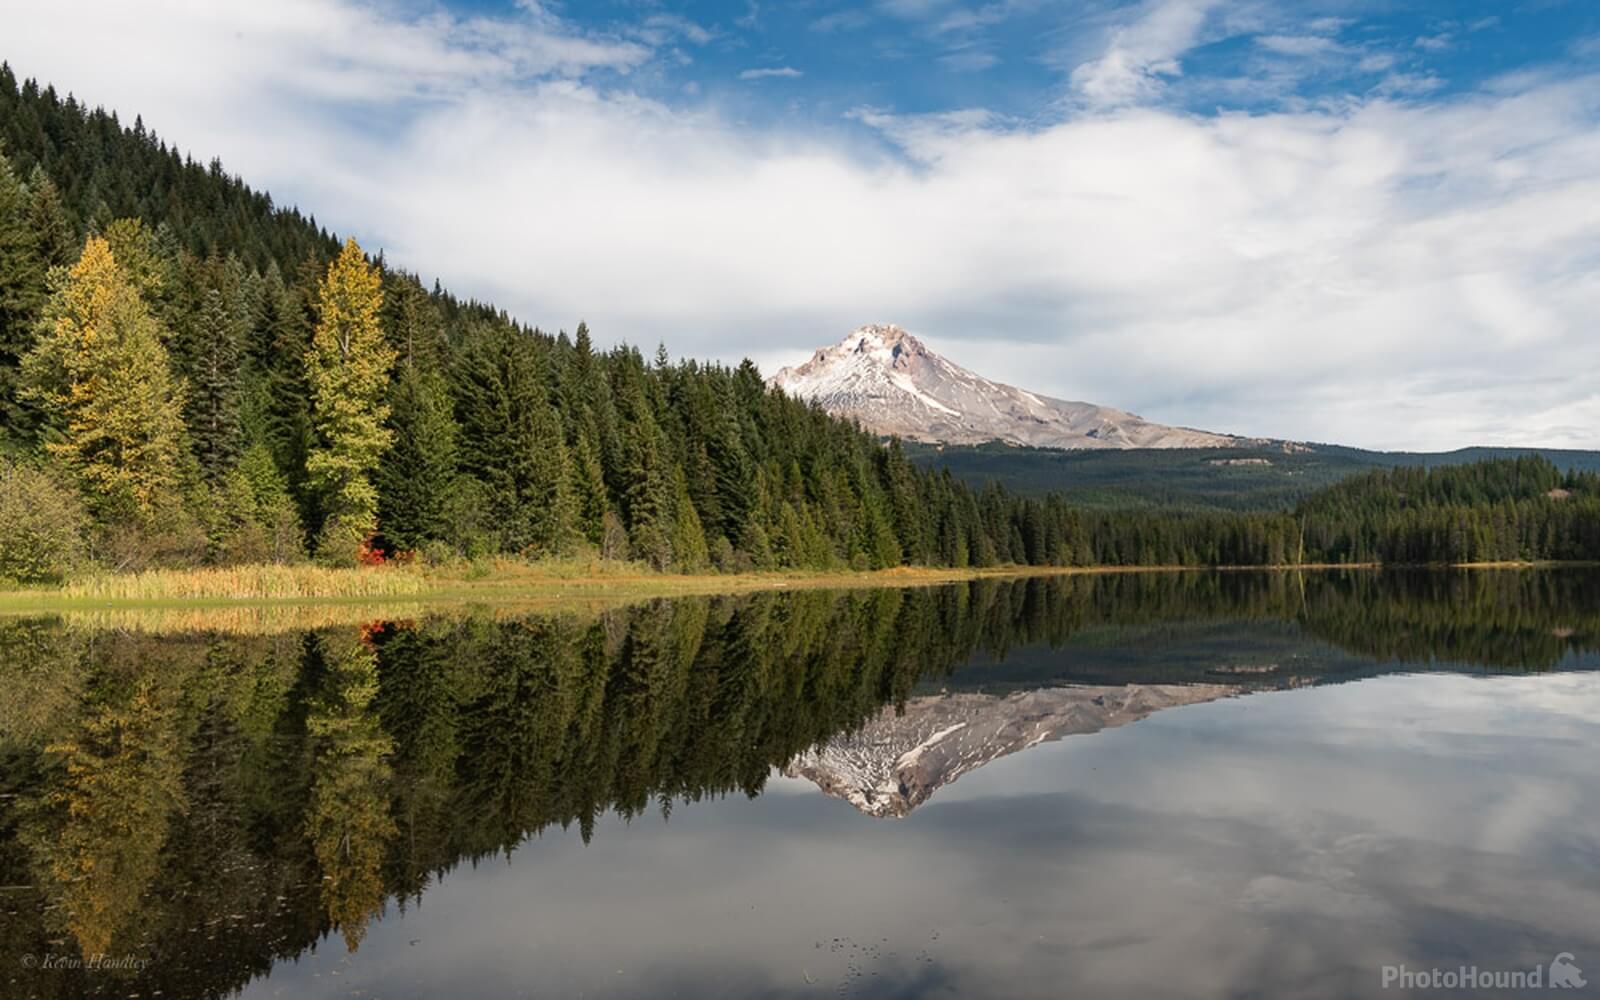 Image of Mount Hood - Trillium Lake Viewpoint by Kevin Handley